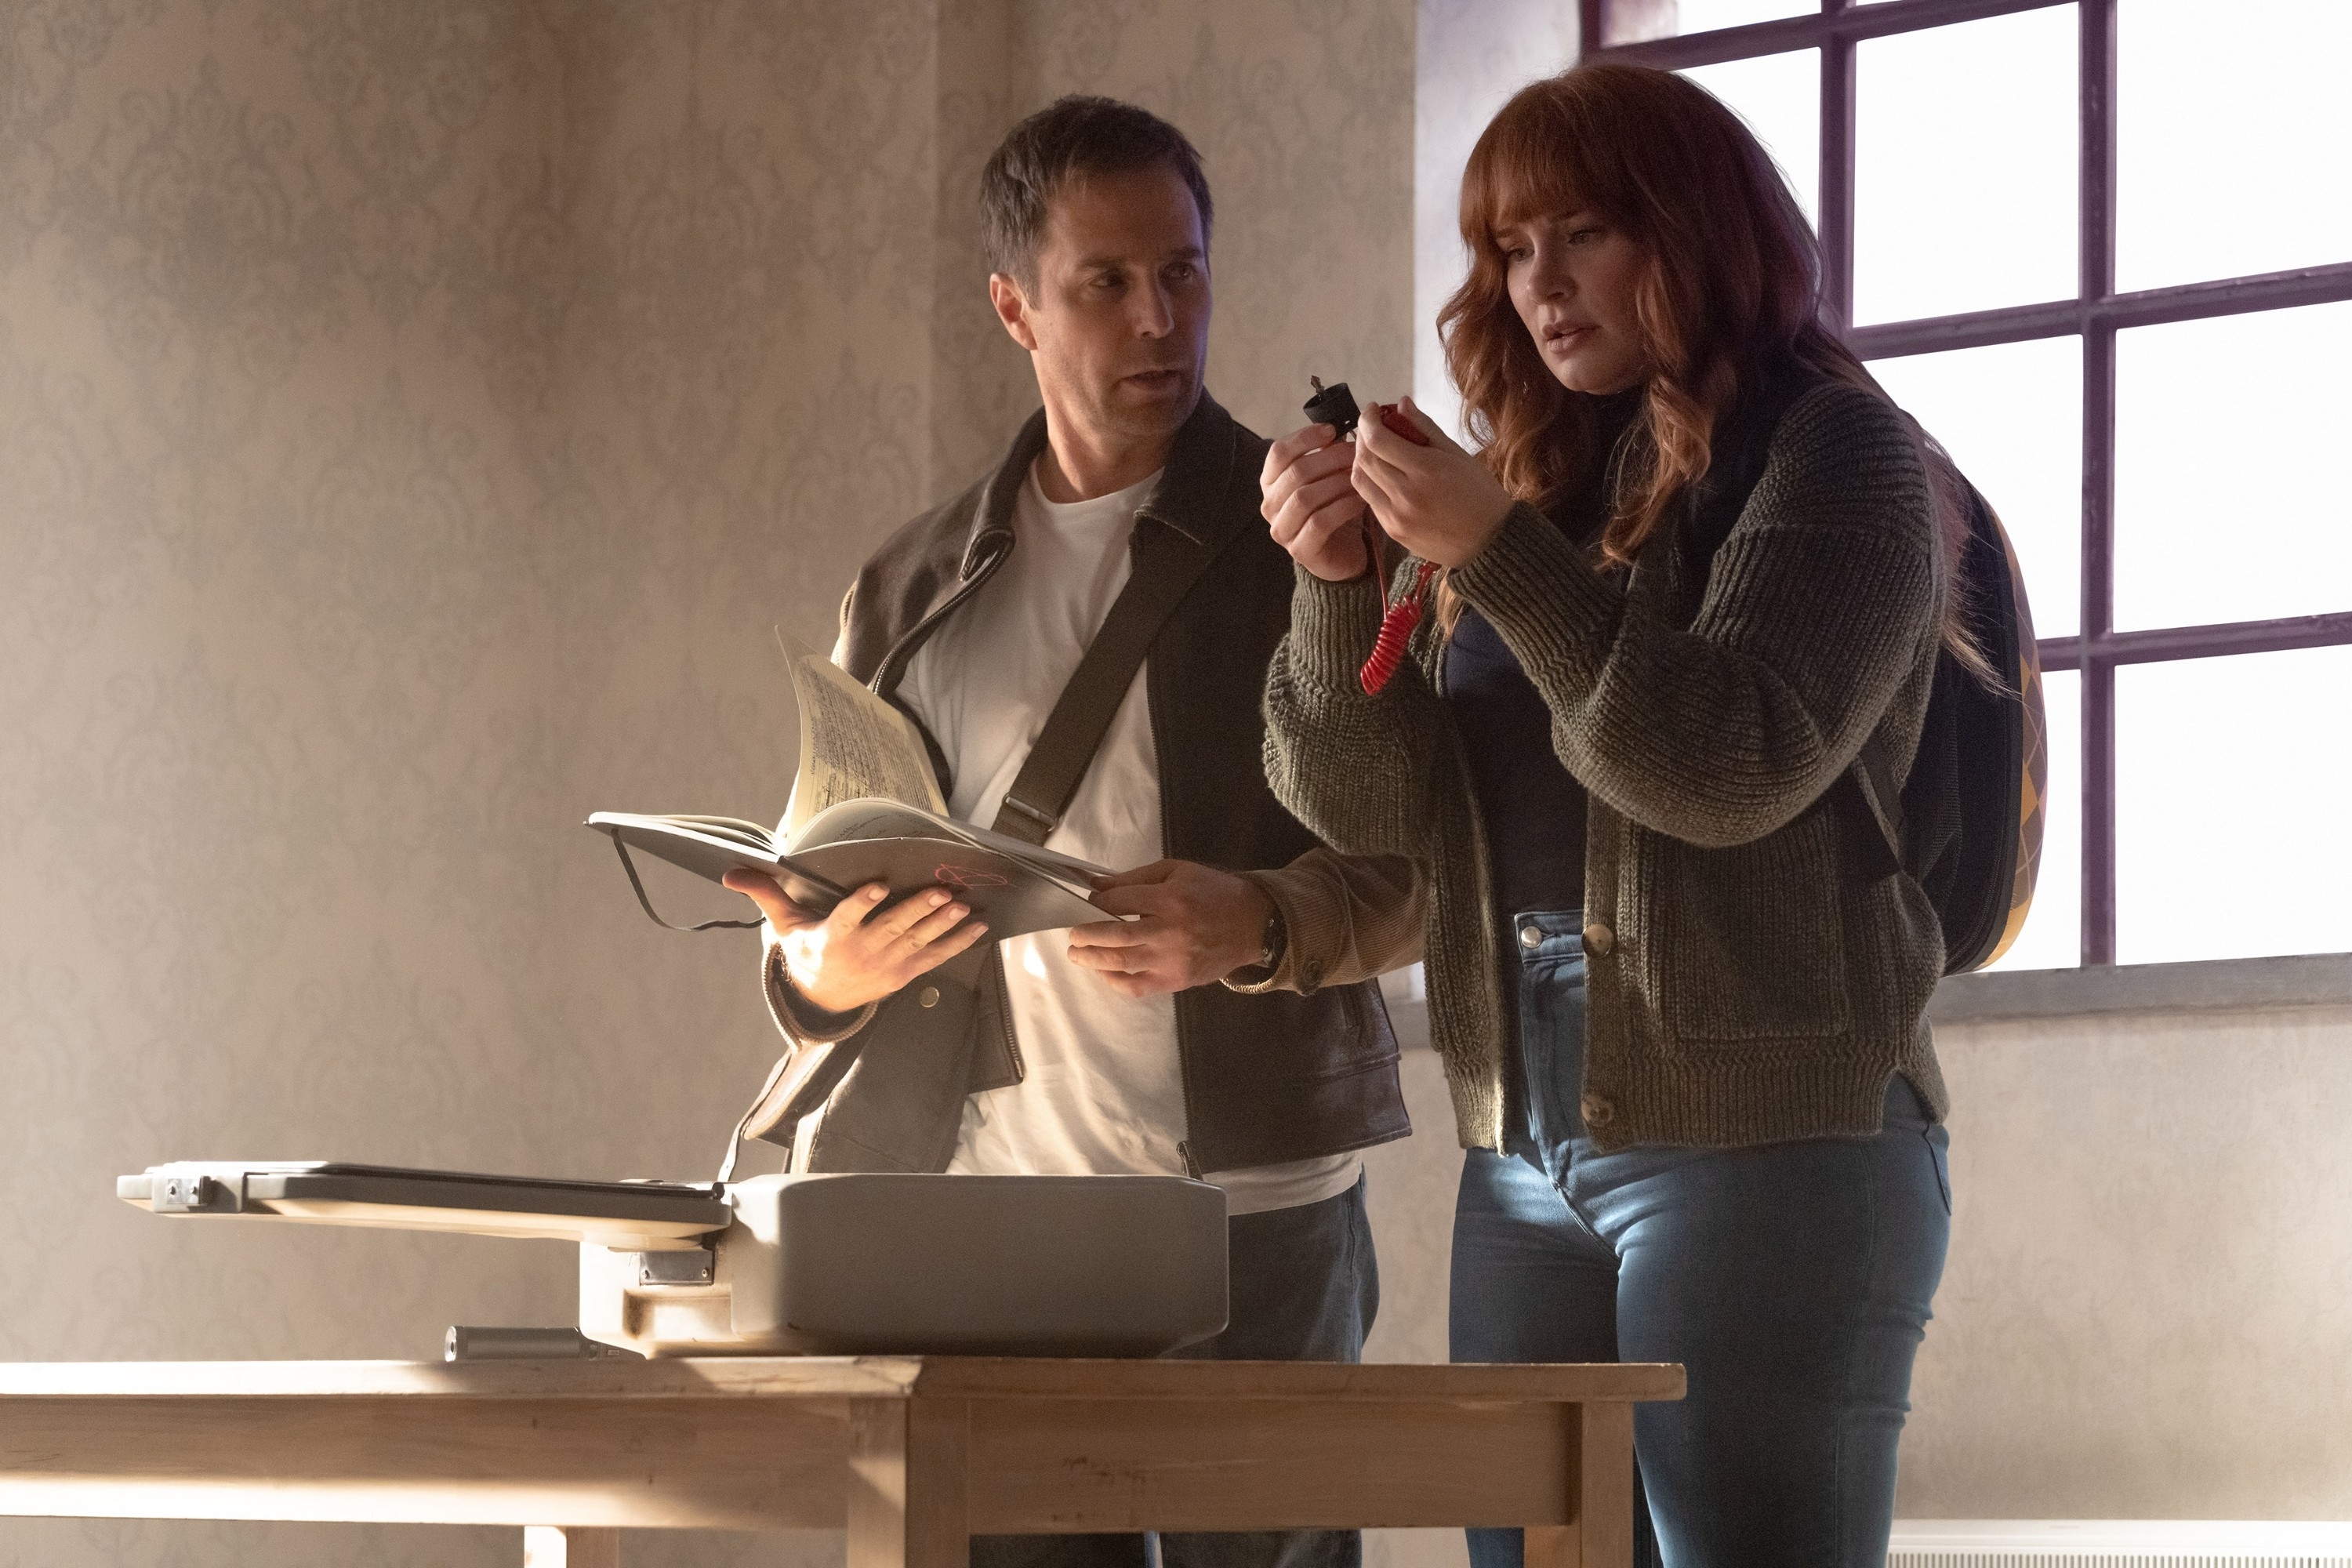 in a scene, Sam Rockwell holding book and pen with a focused expression, Bryce Dallas Howard examining a small object, dressed in casual attire